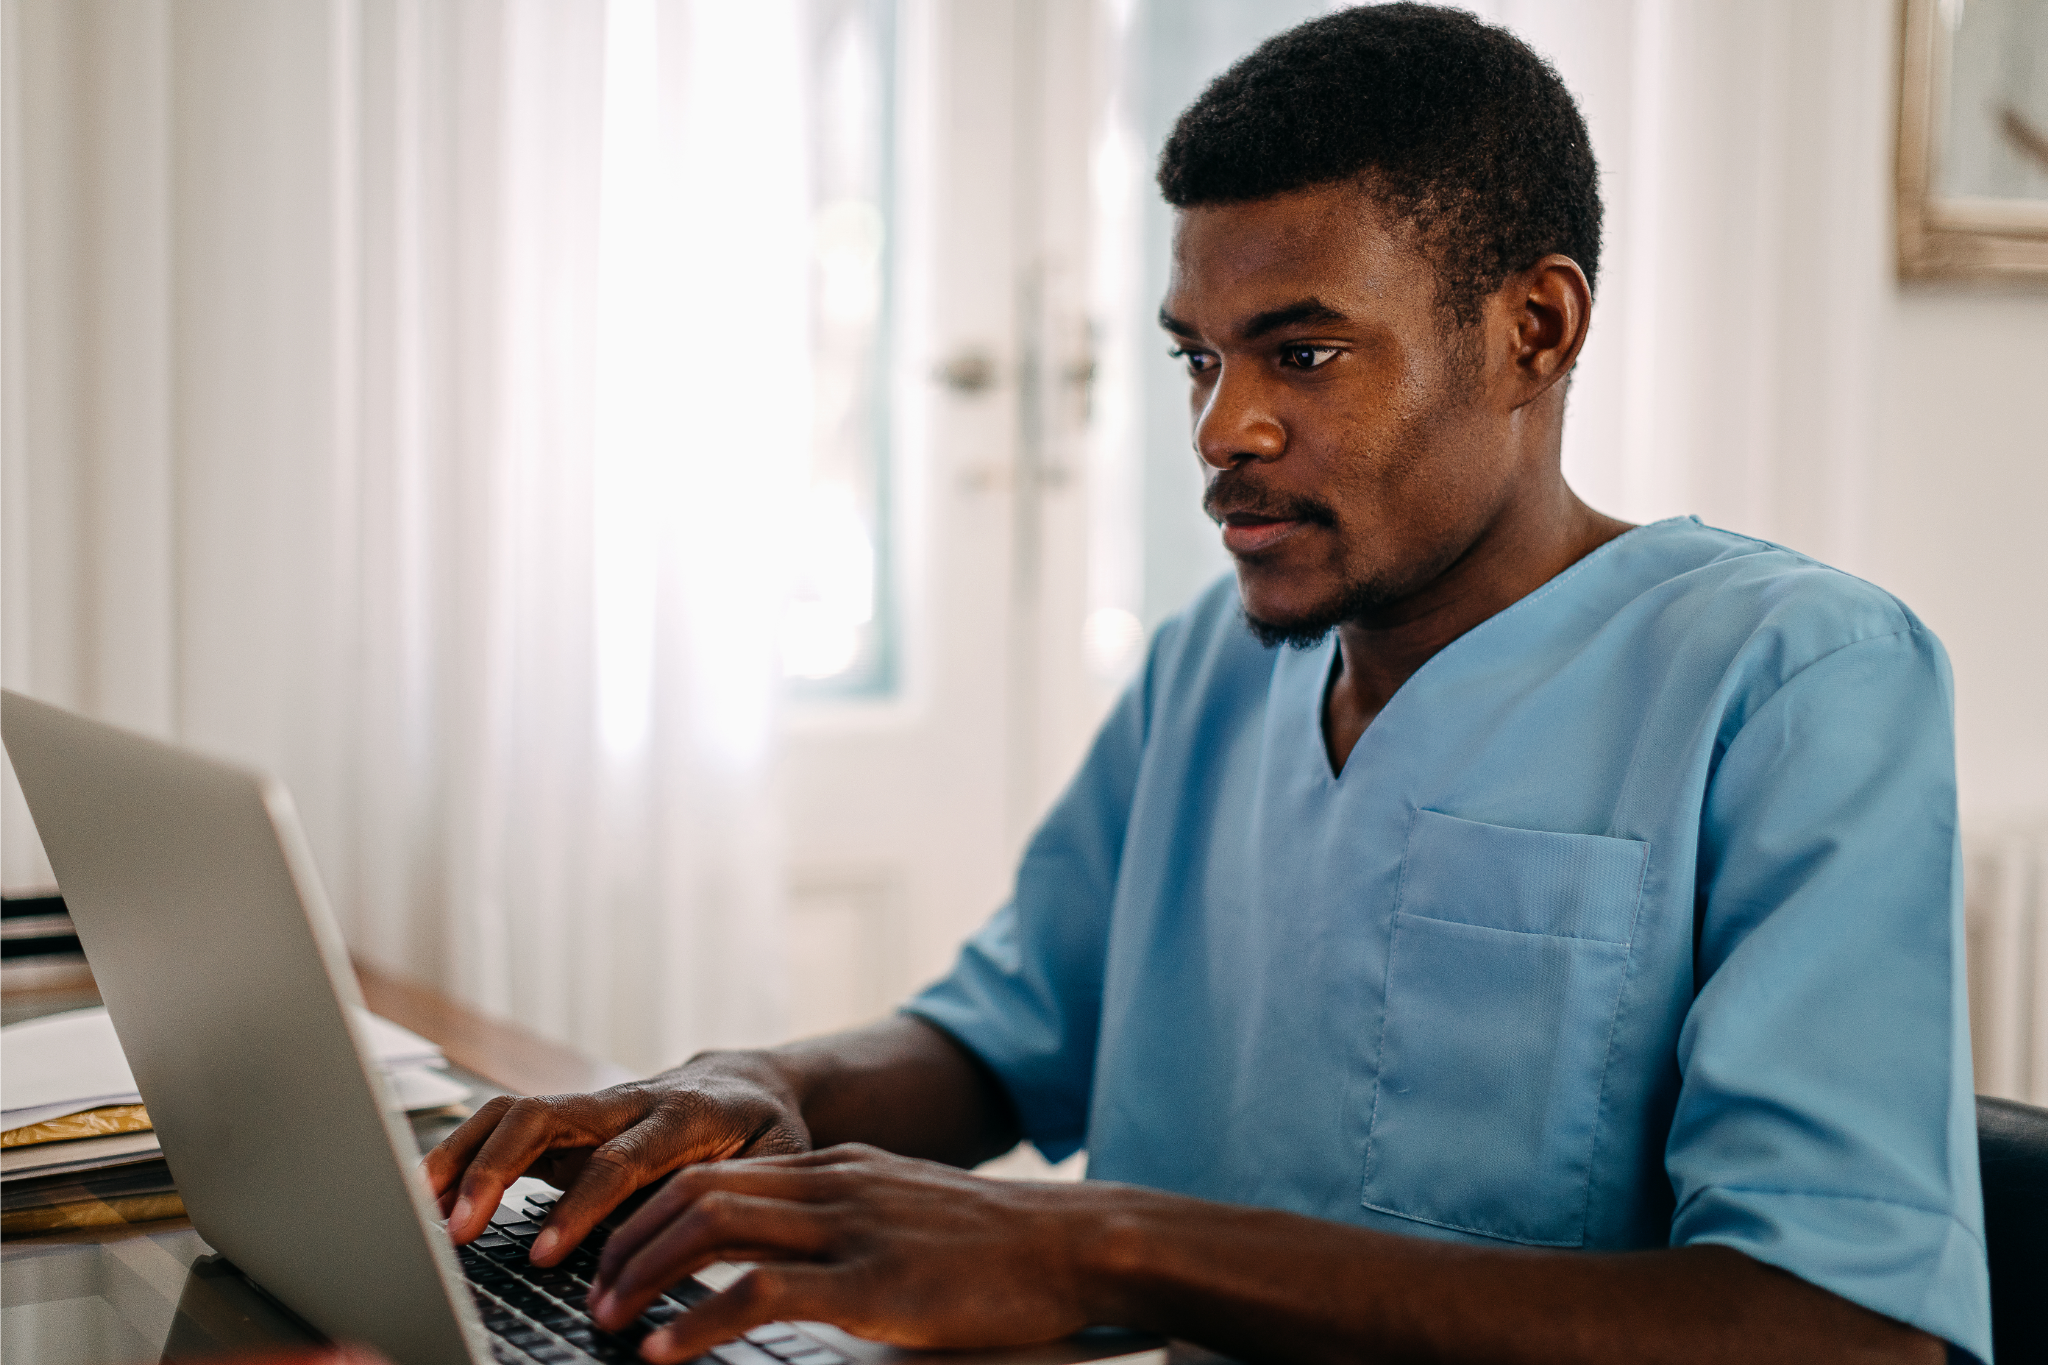 Male nurse completing CPR and First Aid training and testing online